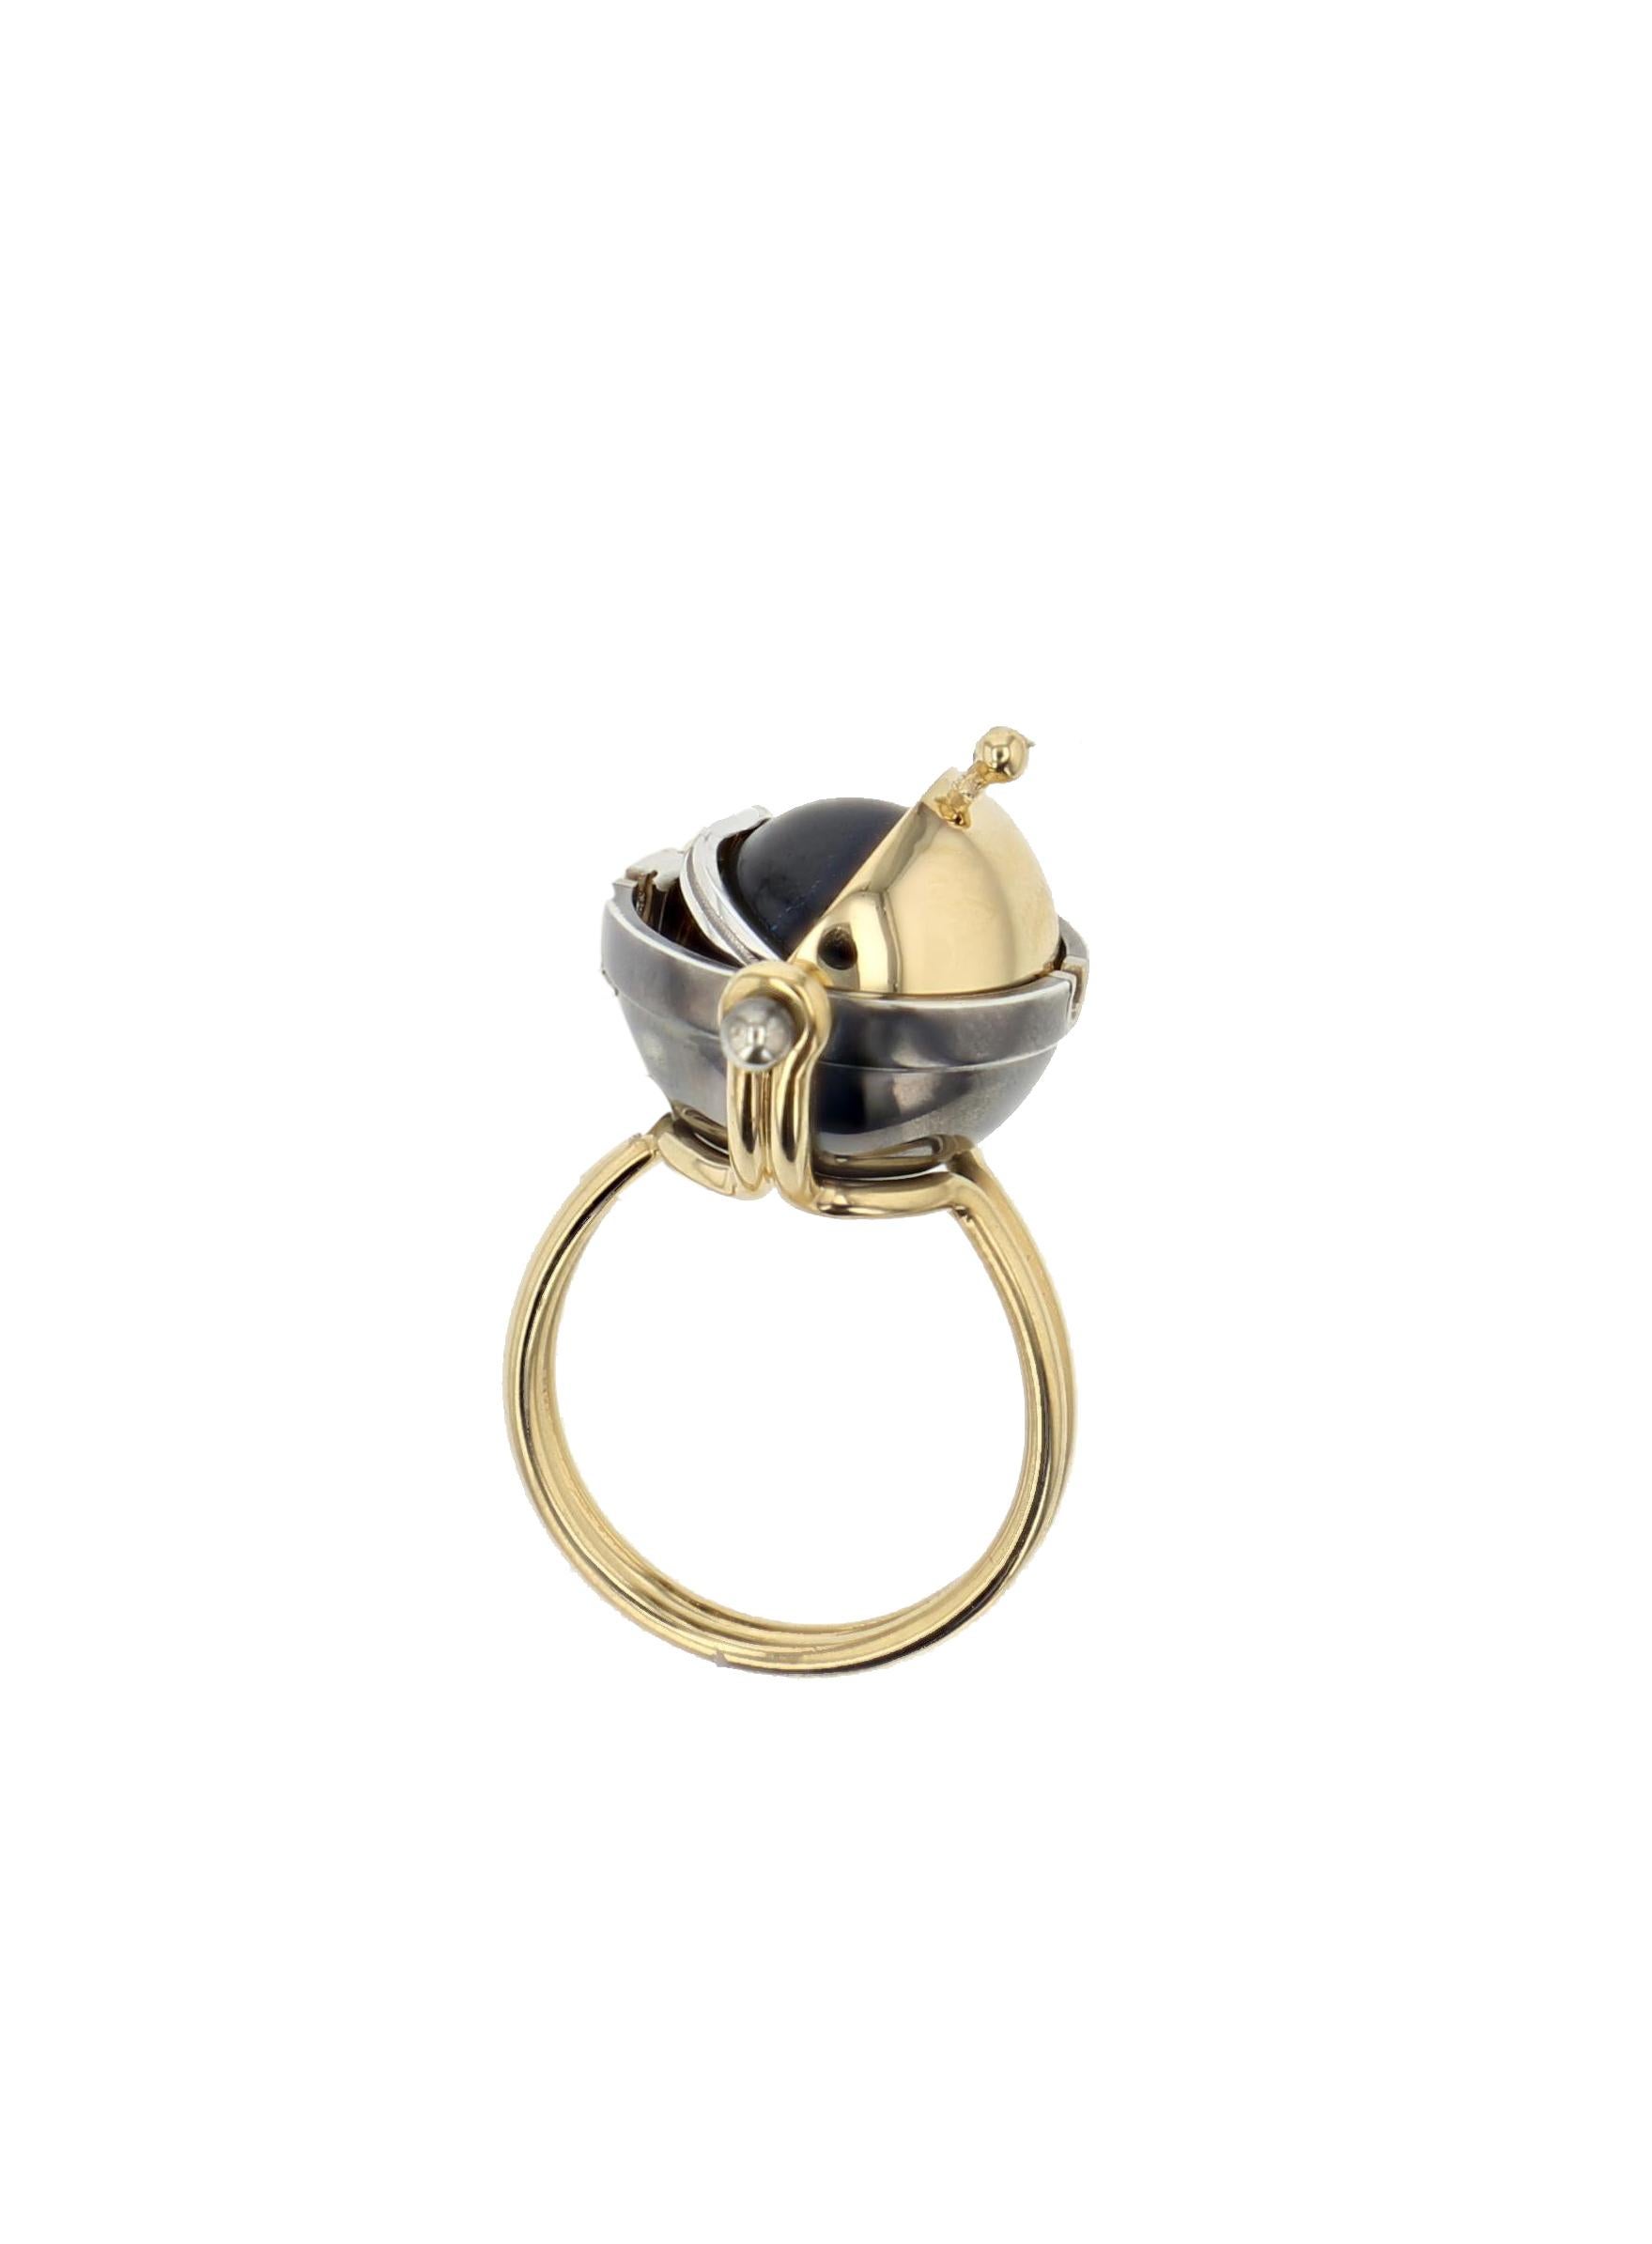 Labradorite Diamond Sphere Ring in 18k yellow gold by Elie Top. Pluton Sphere Ring made of a 18K Yellow Gold and patinated silver structure, mounted by a pivotating sphere that hides or reveals a labradorite circled by a diamond satellite. 
